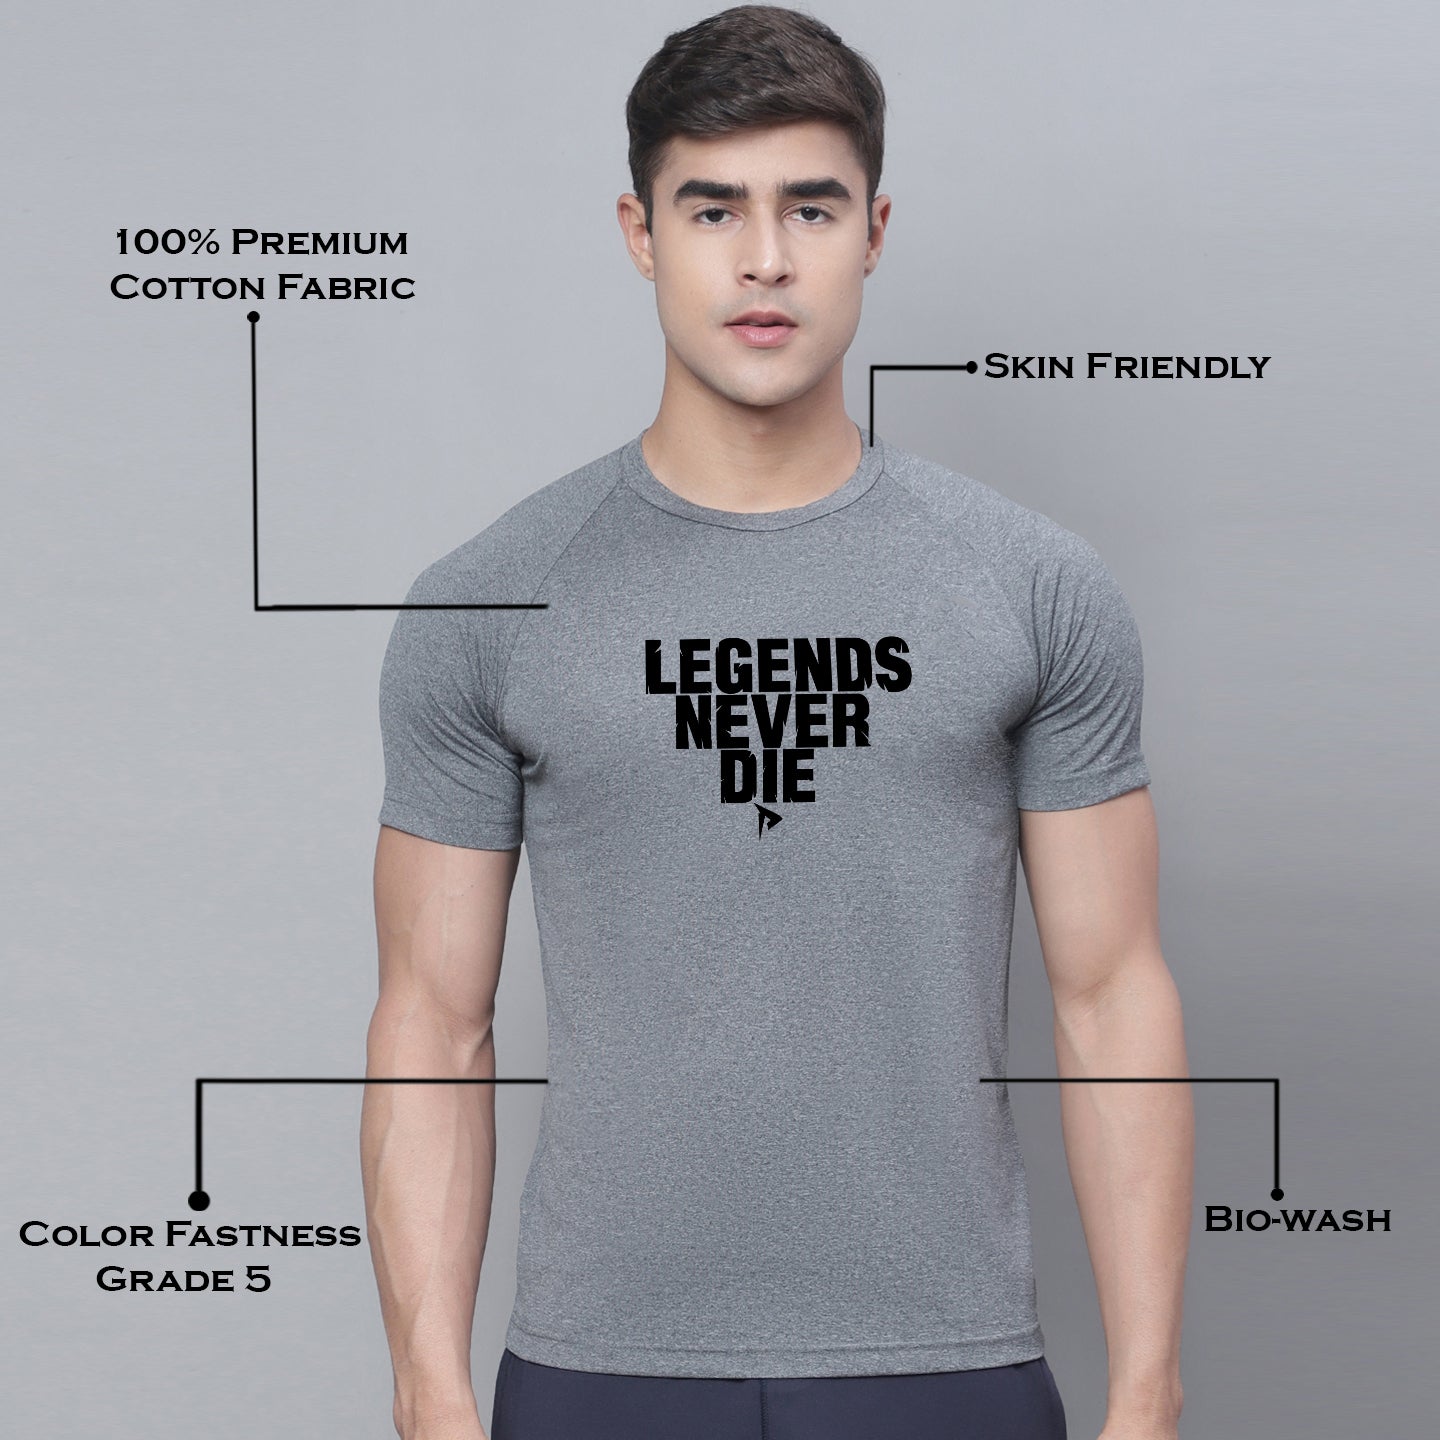 Men Printed Polyster Sports Training T-Shirt - Friskers